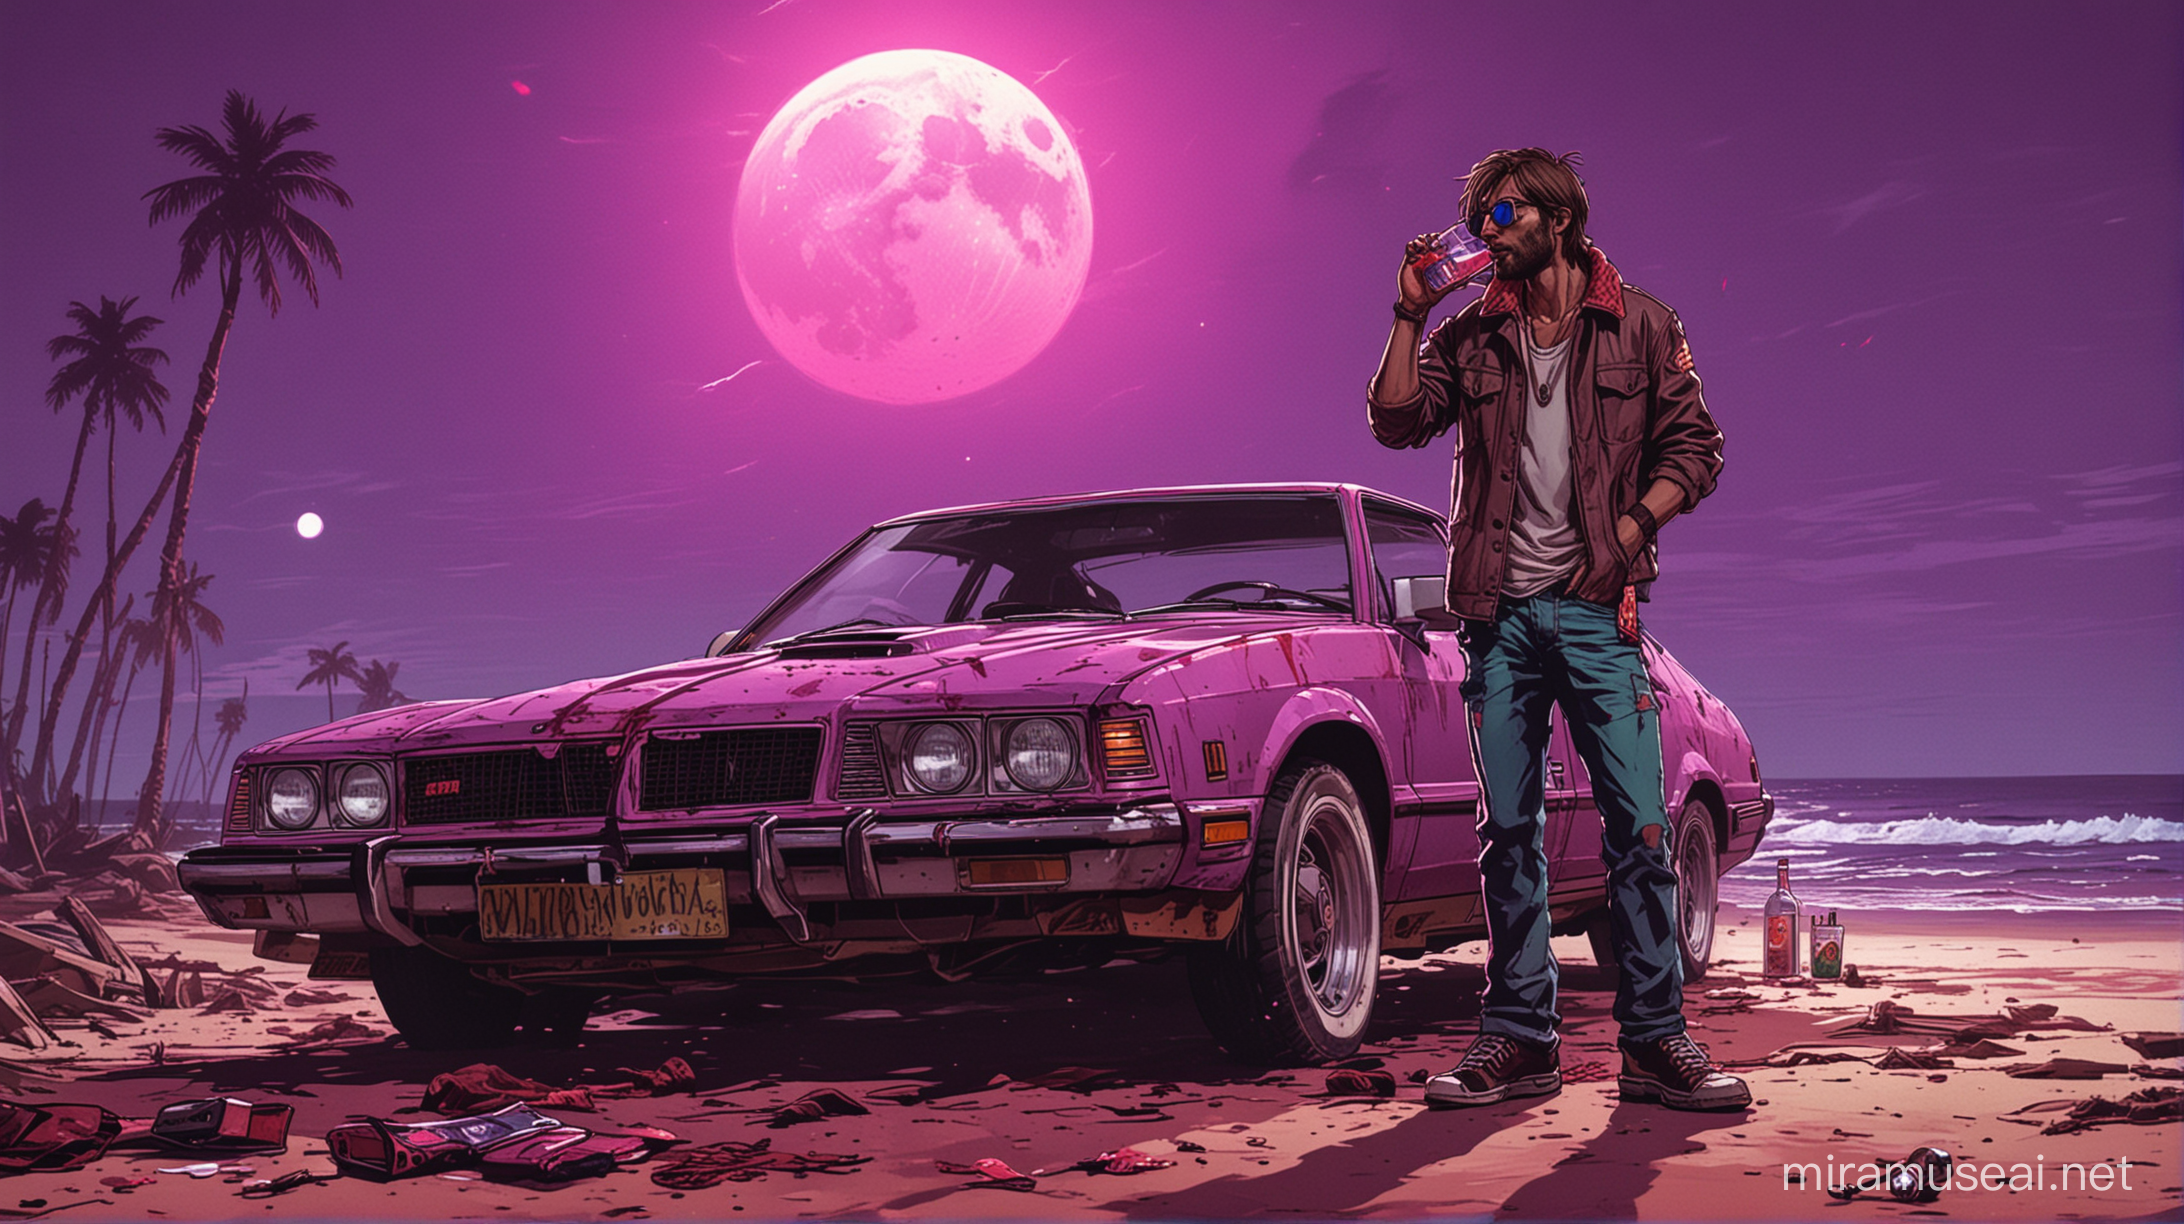 the son from hotline miami 2 drinking vodka outside of a bloody car on the beach with a purple moon in the sky